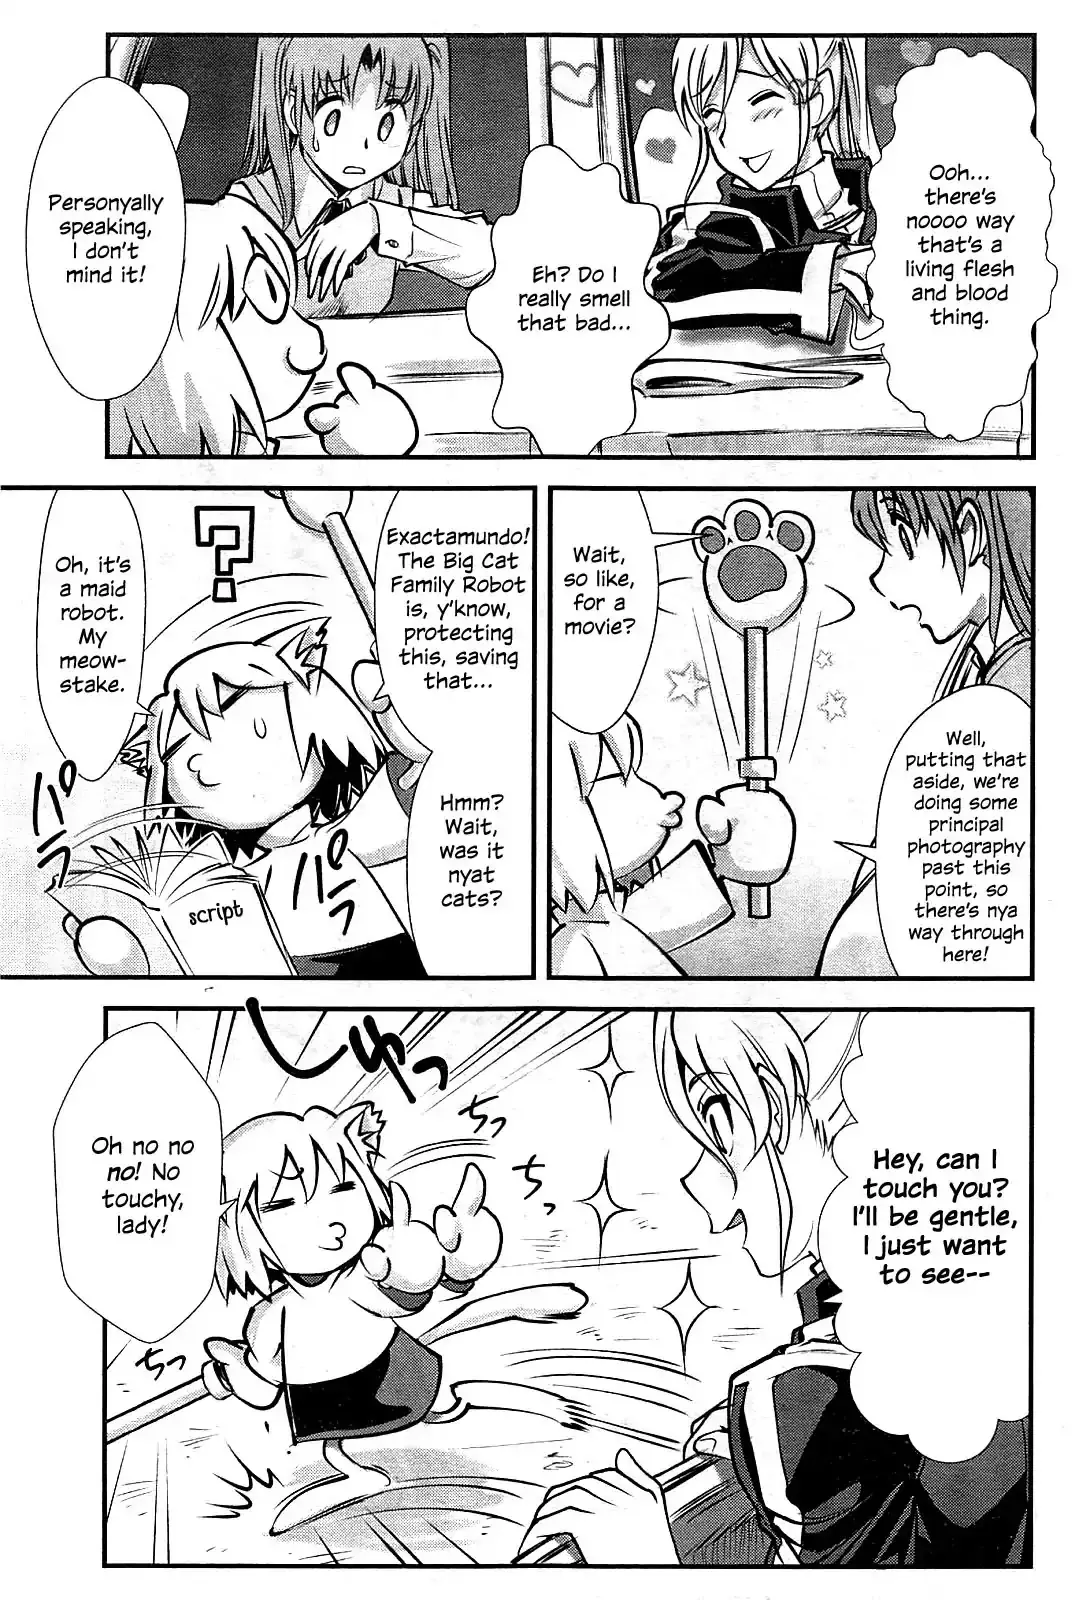 Melty Blood - Back Alley Alliance Nightmare - 1 page 36